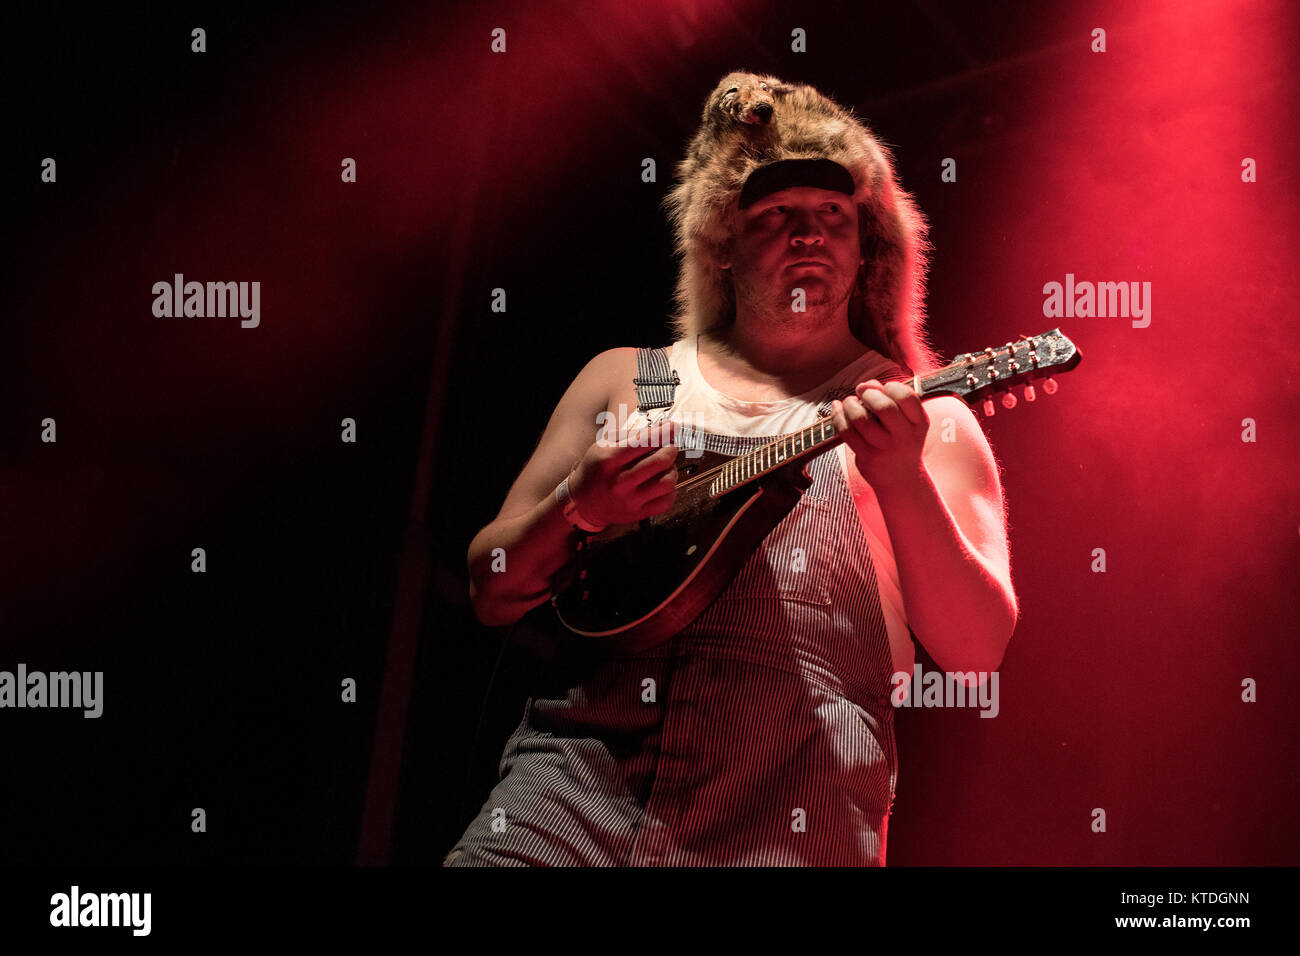 The Finnish country band Steve ‘N’ Seagulls performs a live concert at the Faroese music festival G! Festival 2016. Faroe Islands, 16/07 2016. Stock Photo